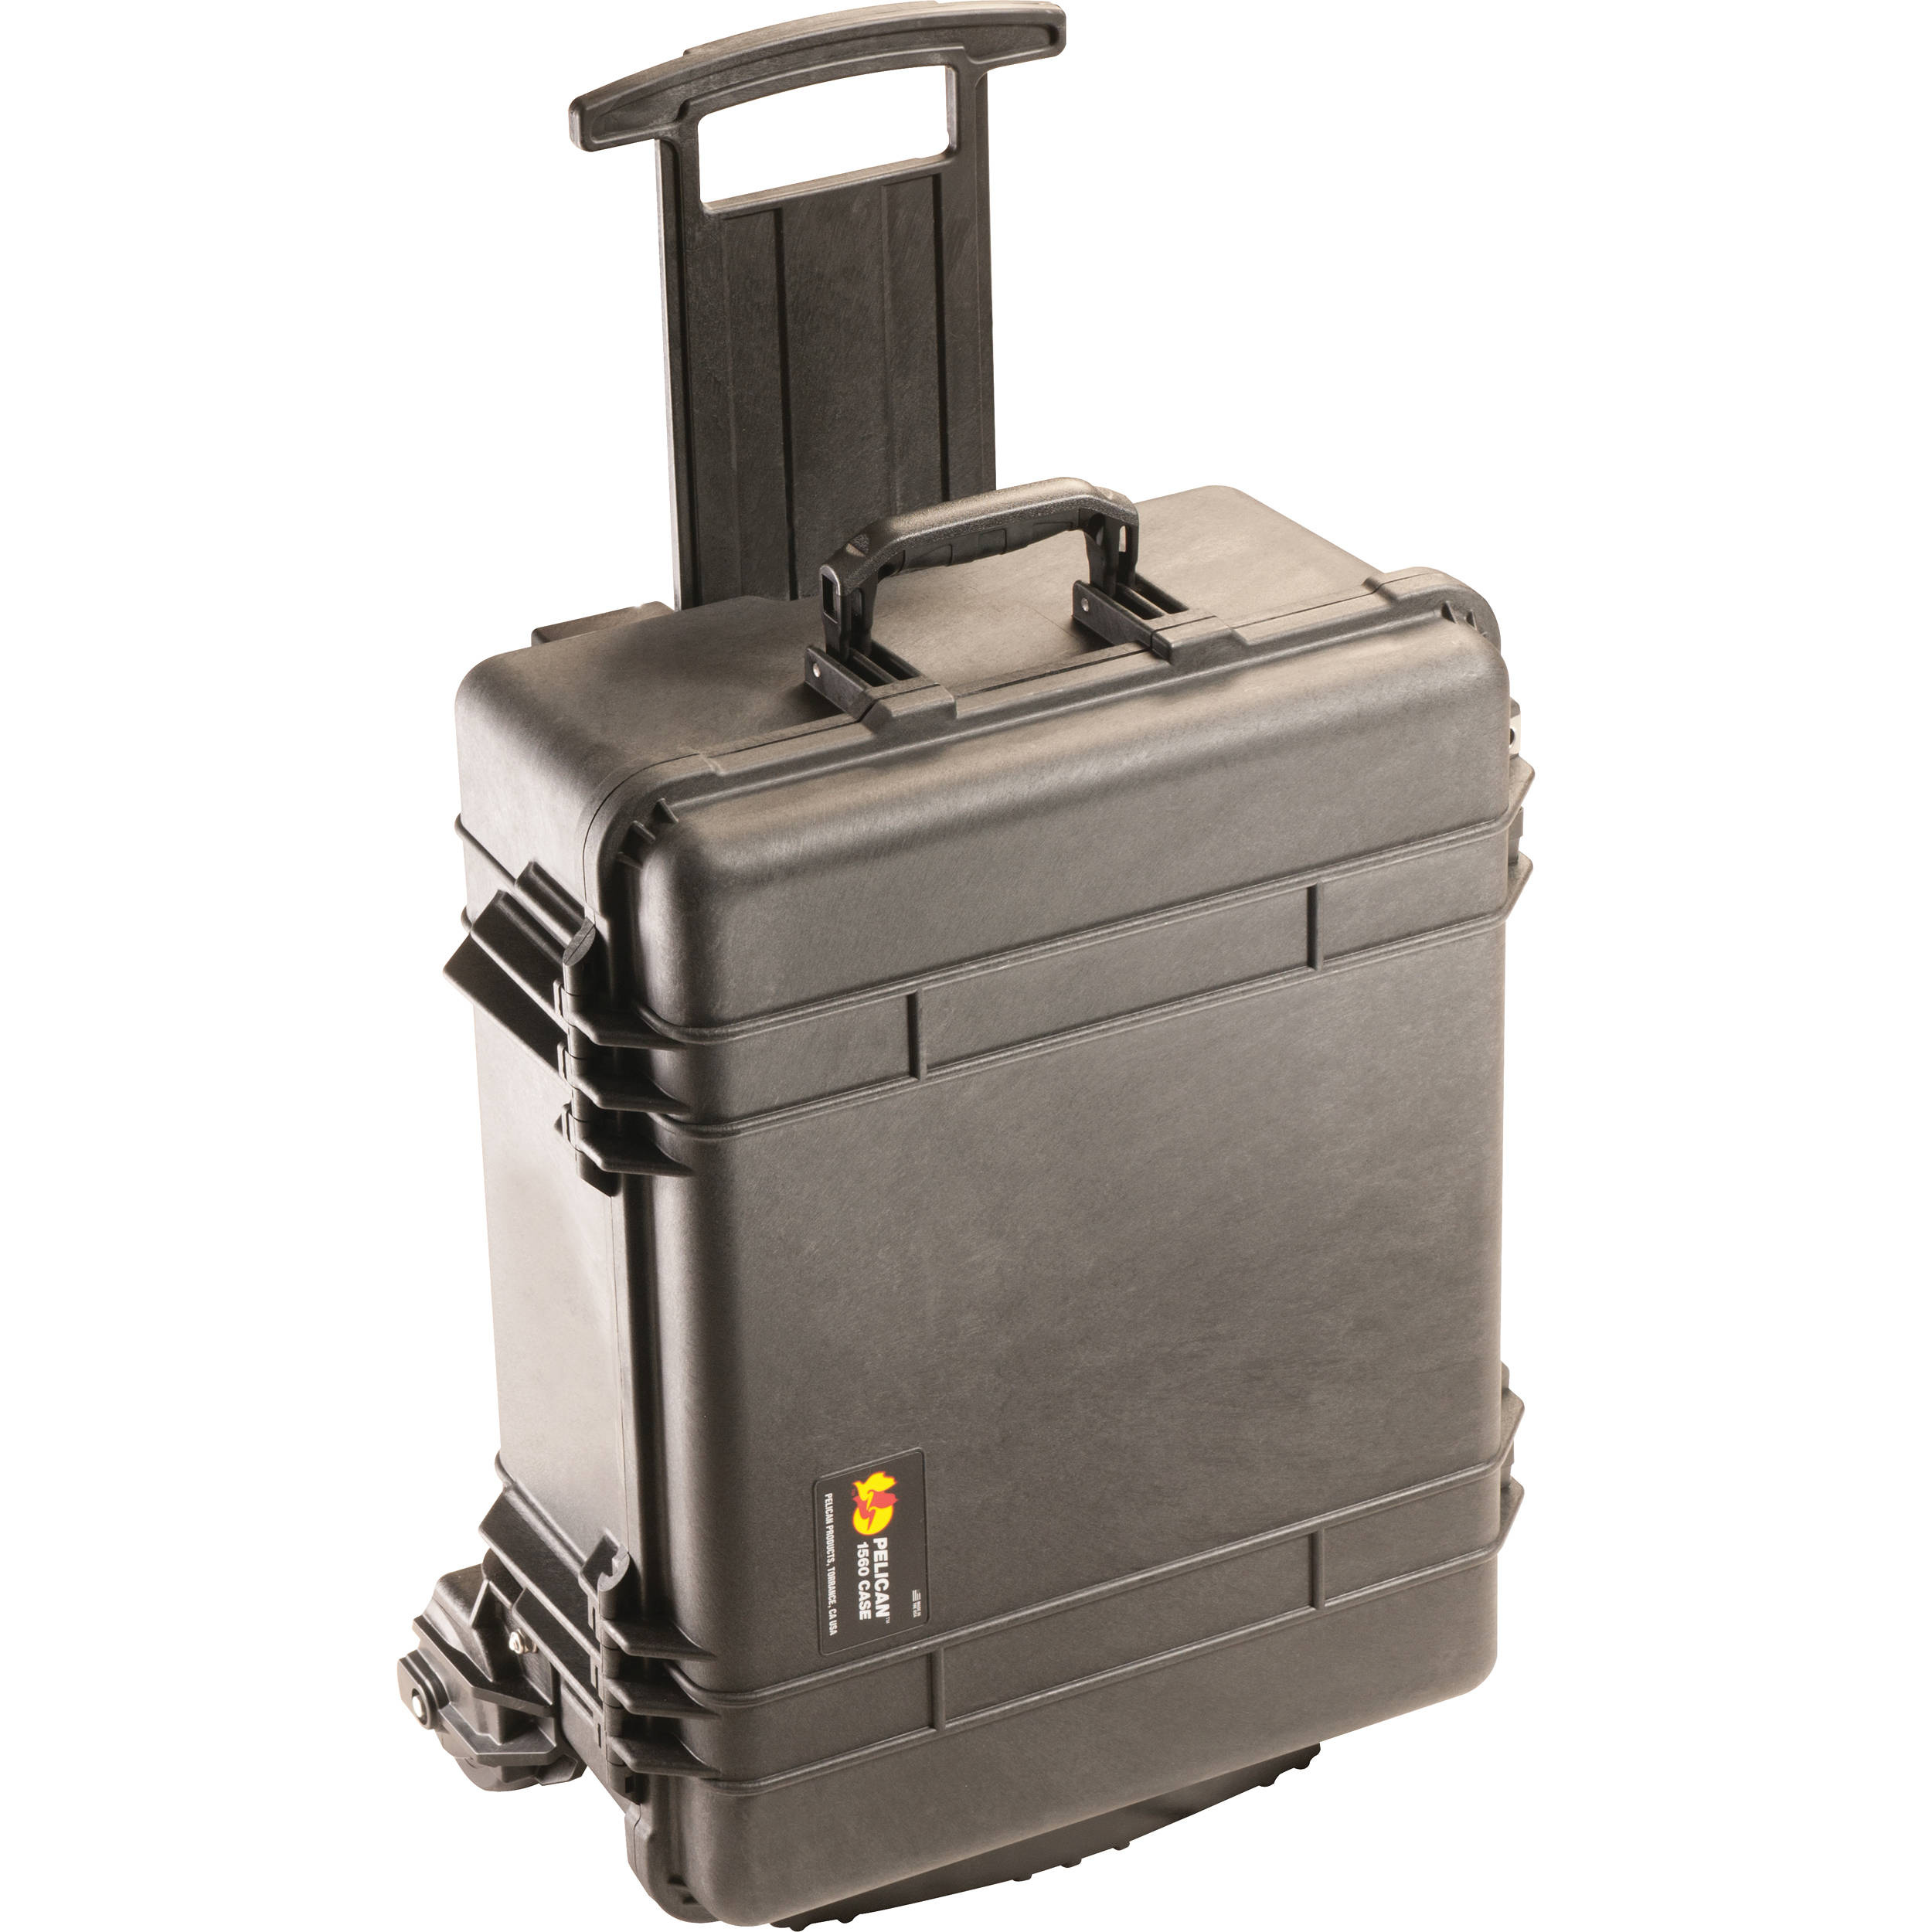 Pelican 1560 Carry on Case with Mobility Kit without Foam (Black)